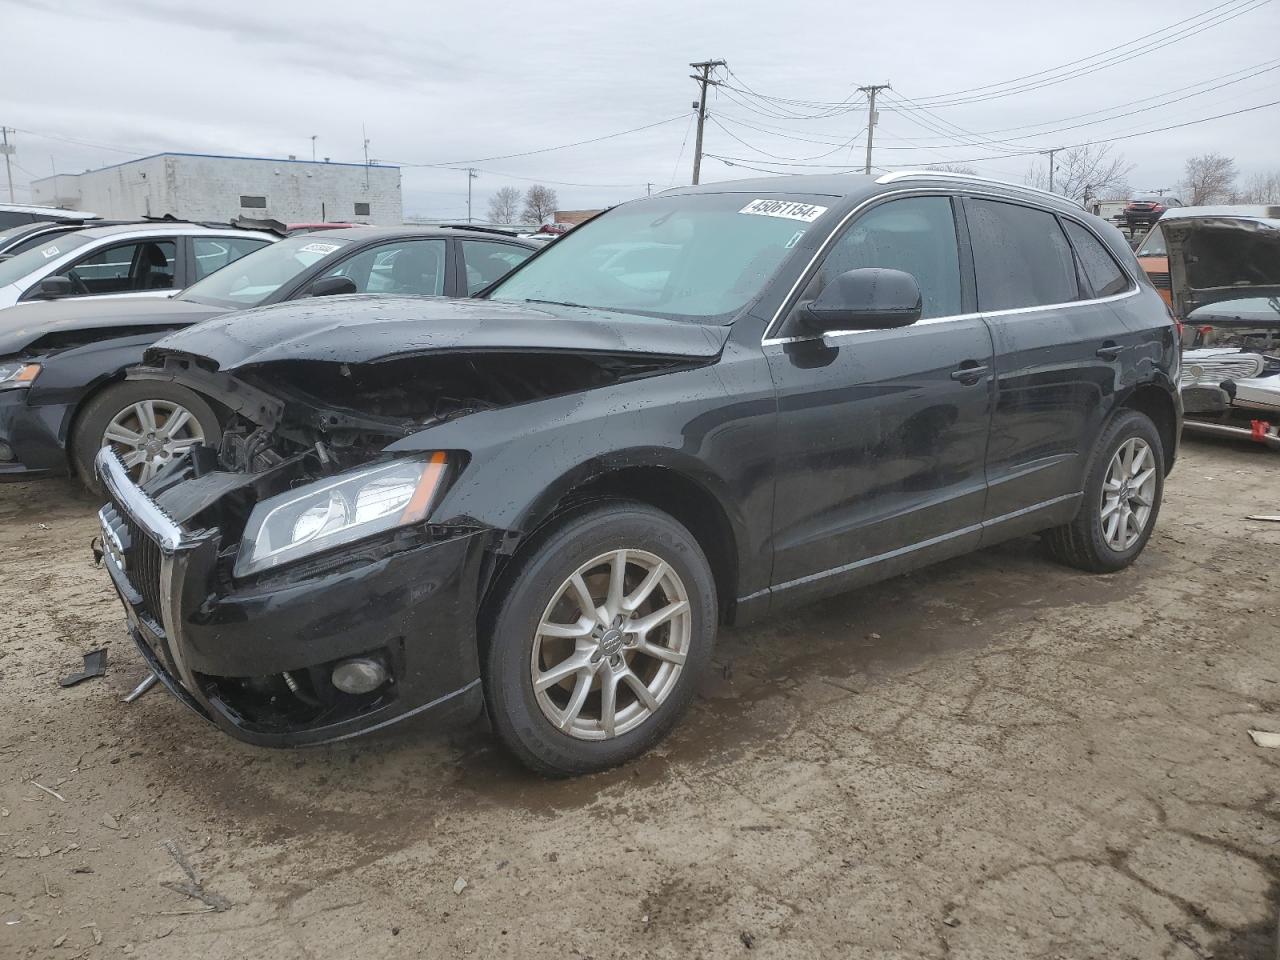 vin: WA1KK78R59A033804 WA1KK78R59A033804 2009 audi q5 3200 for Sale in 60411 5546, Il - Chicago South, Chicago Heights, USA